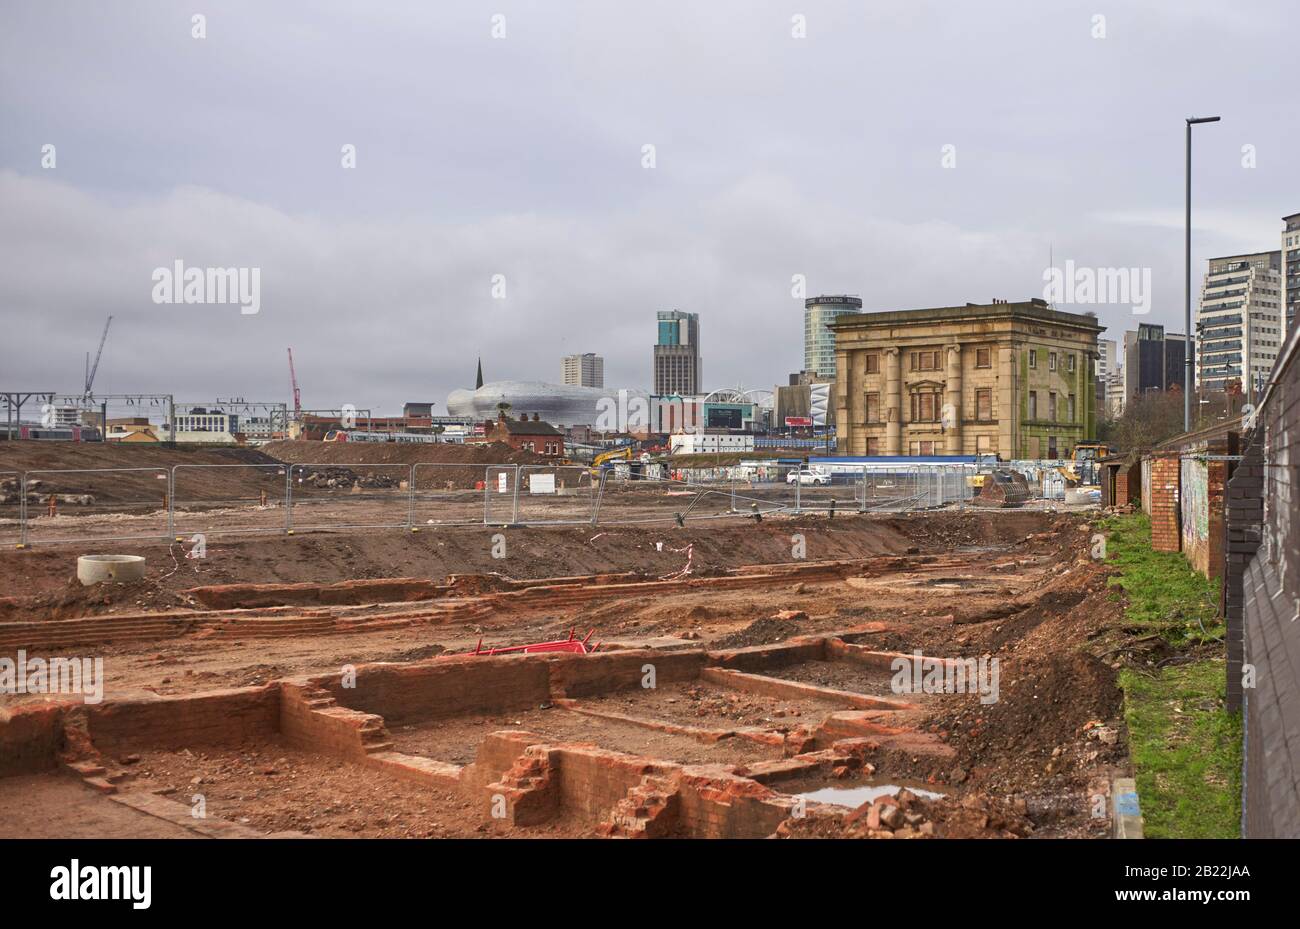 Curzon Street station and the building works being prepared for the new HS2 station in Digbeth, Birmingham Stock Photo